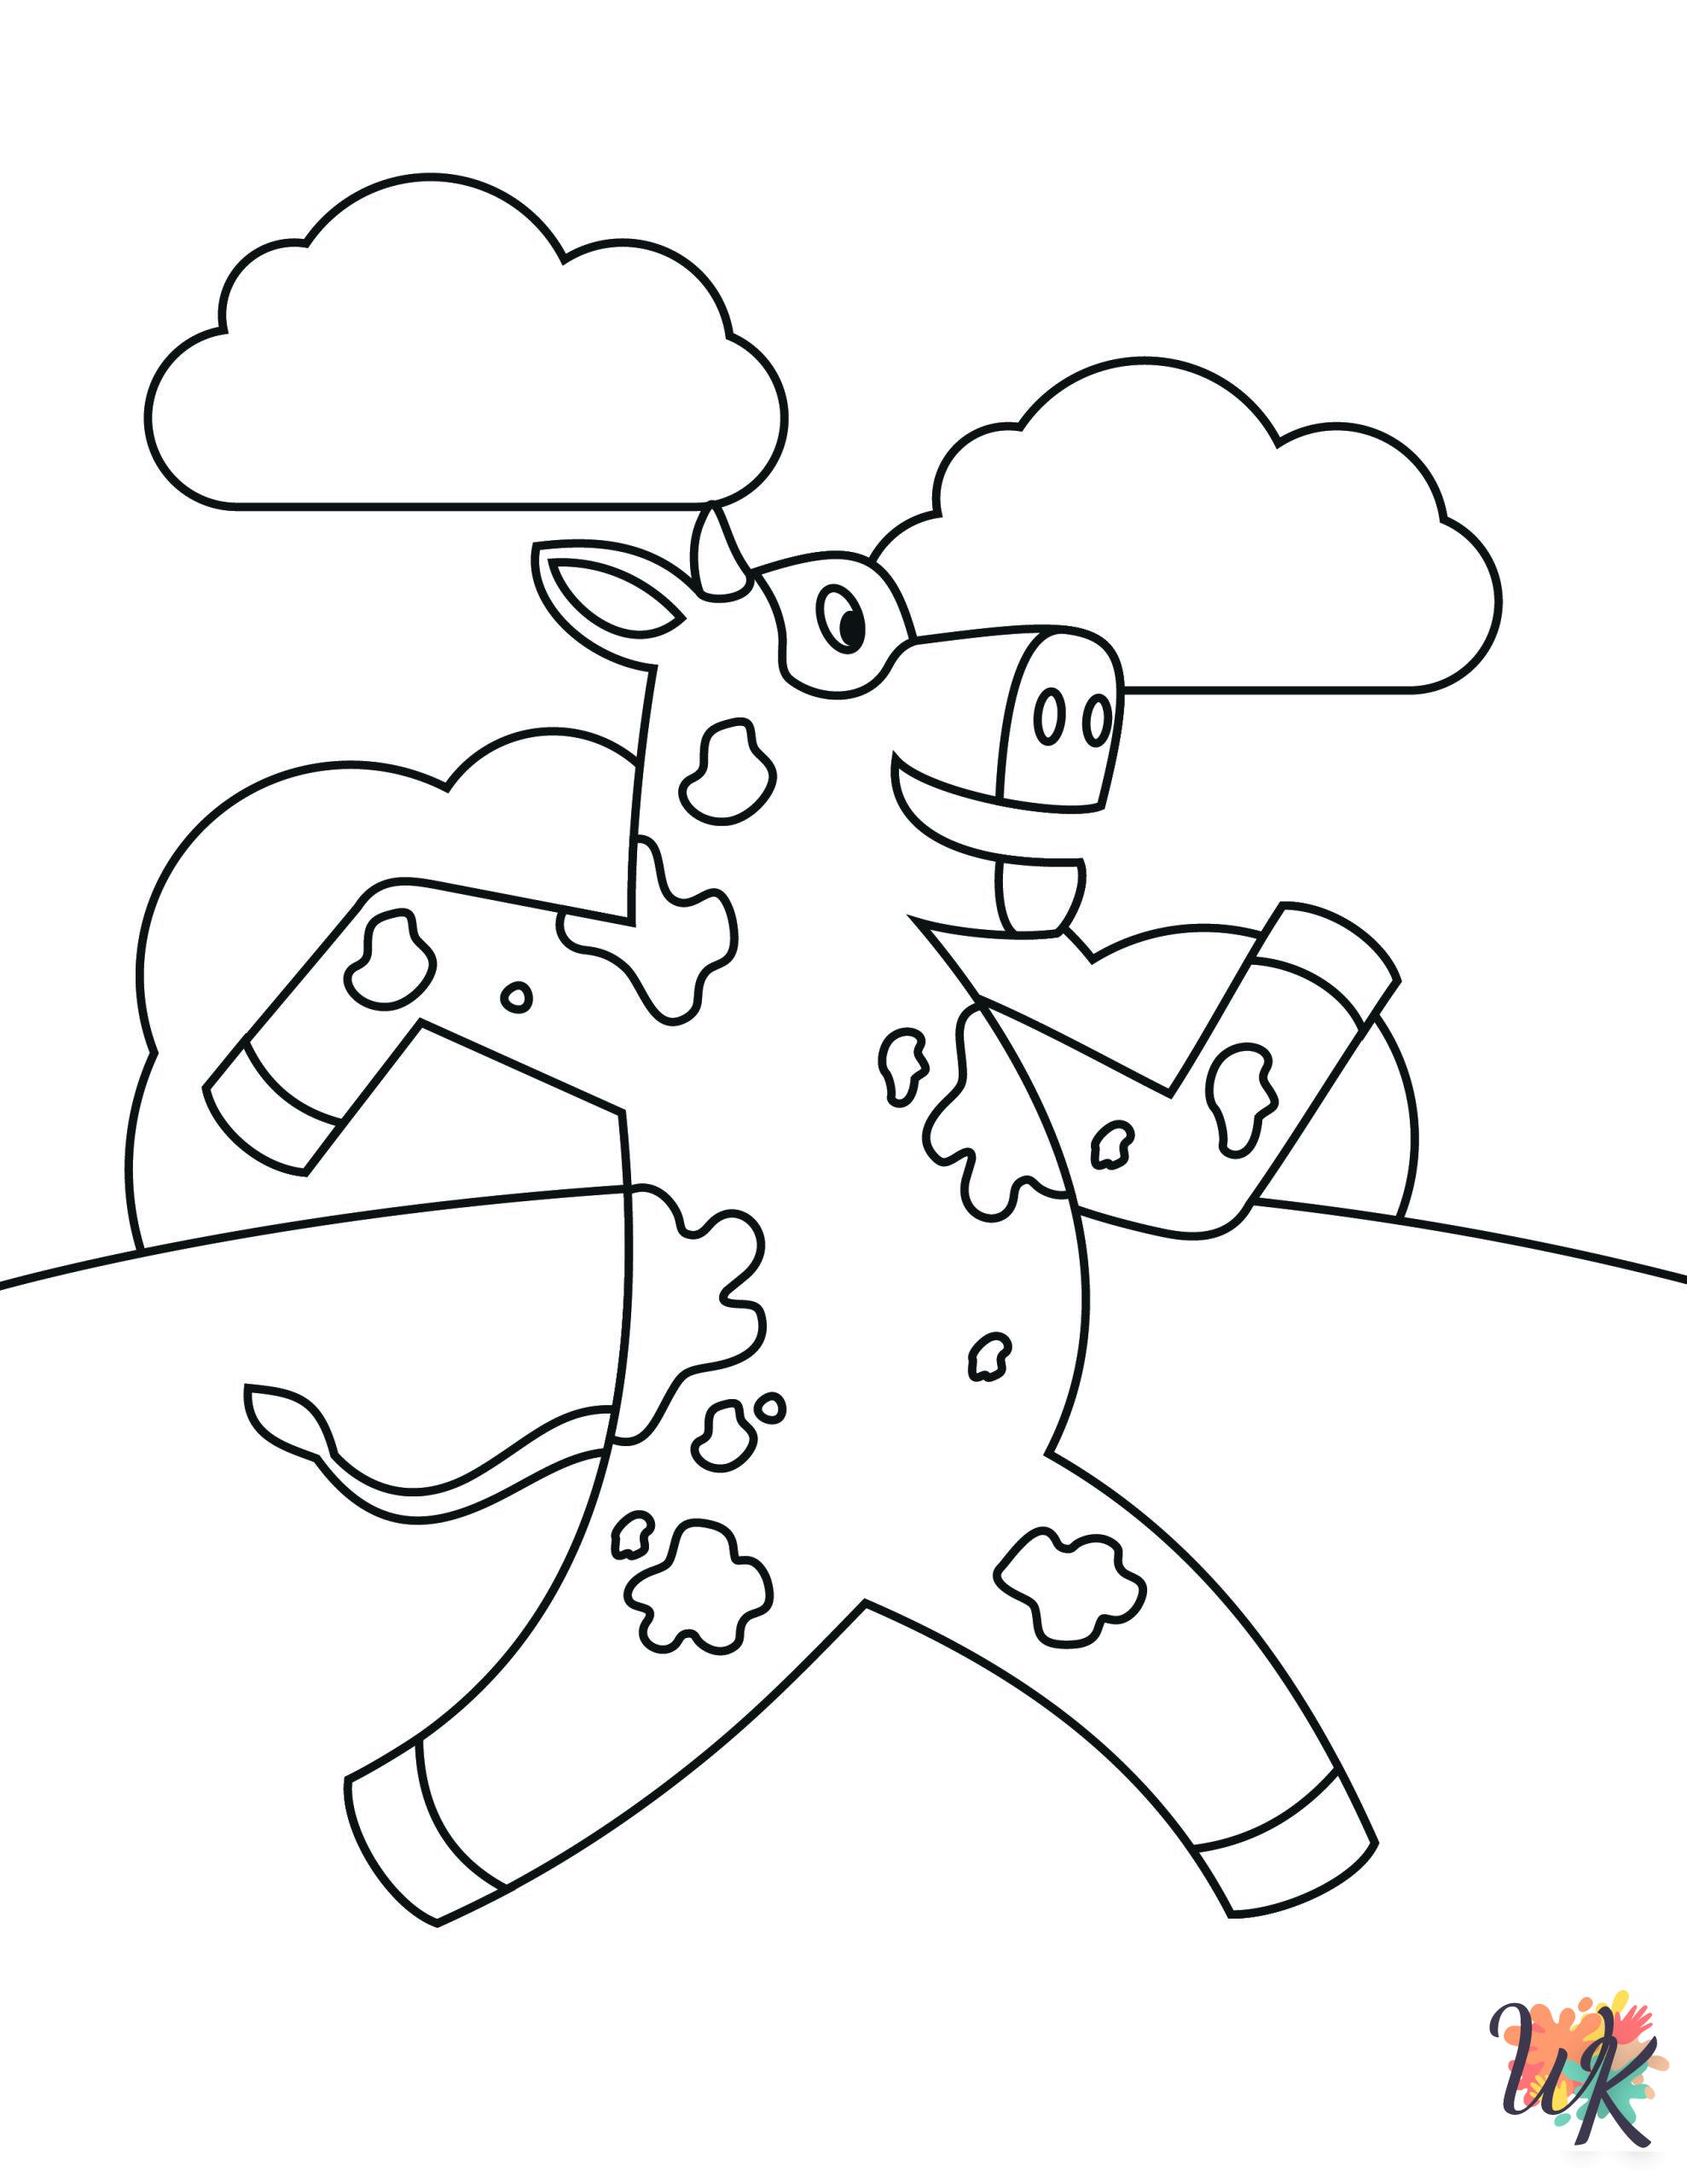 Cow coloring book pages